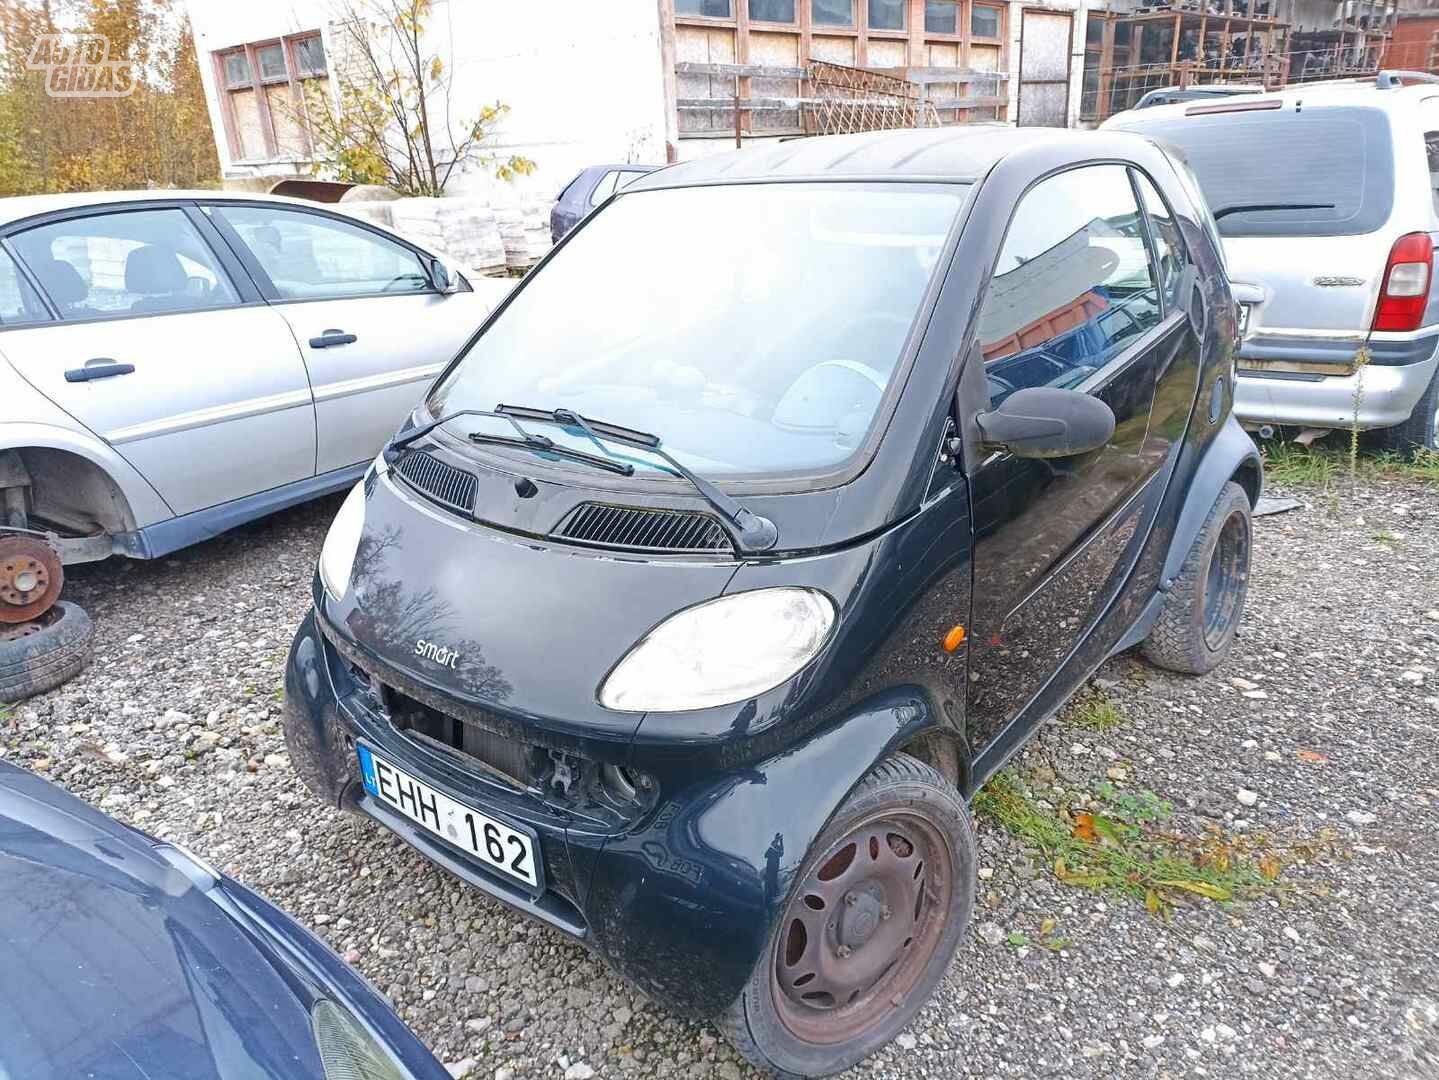 Smart Fortwo I 2000 y parts